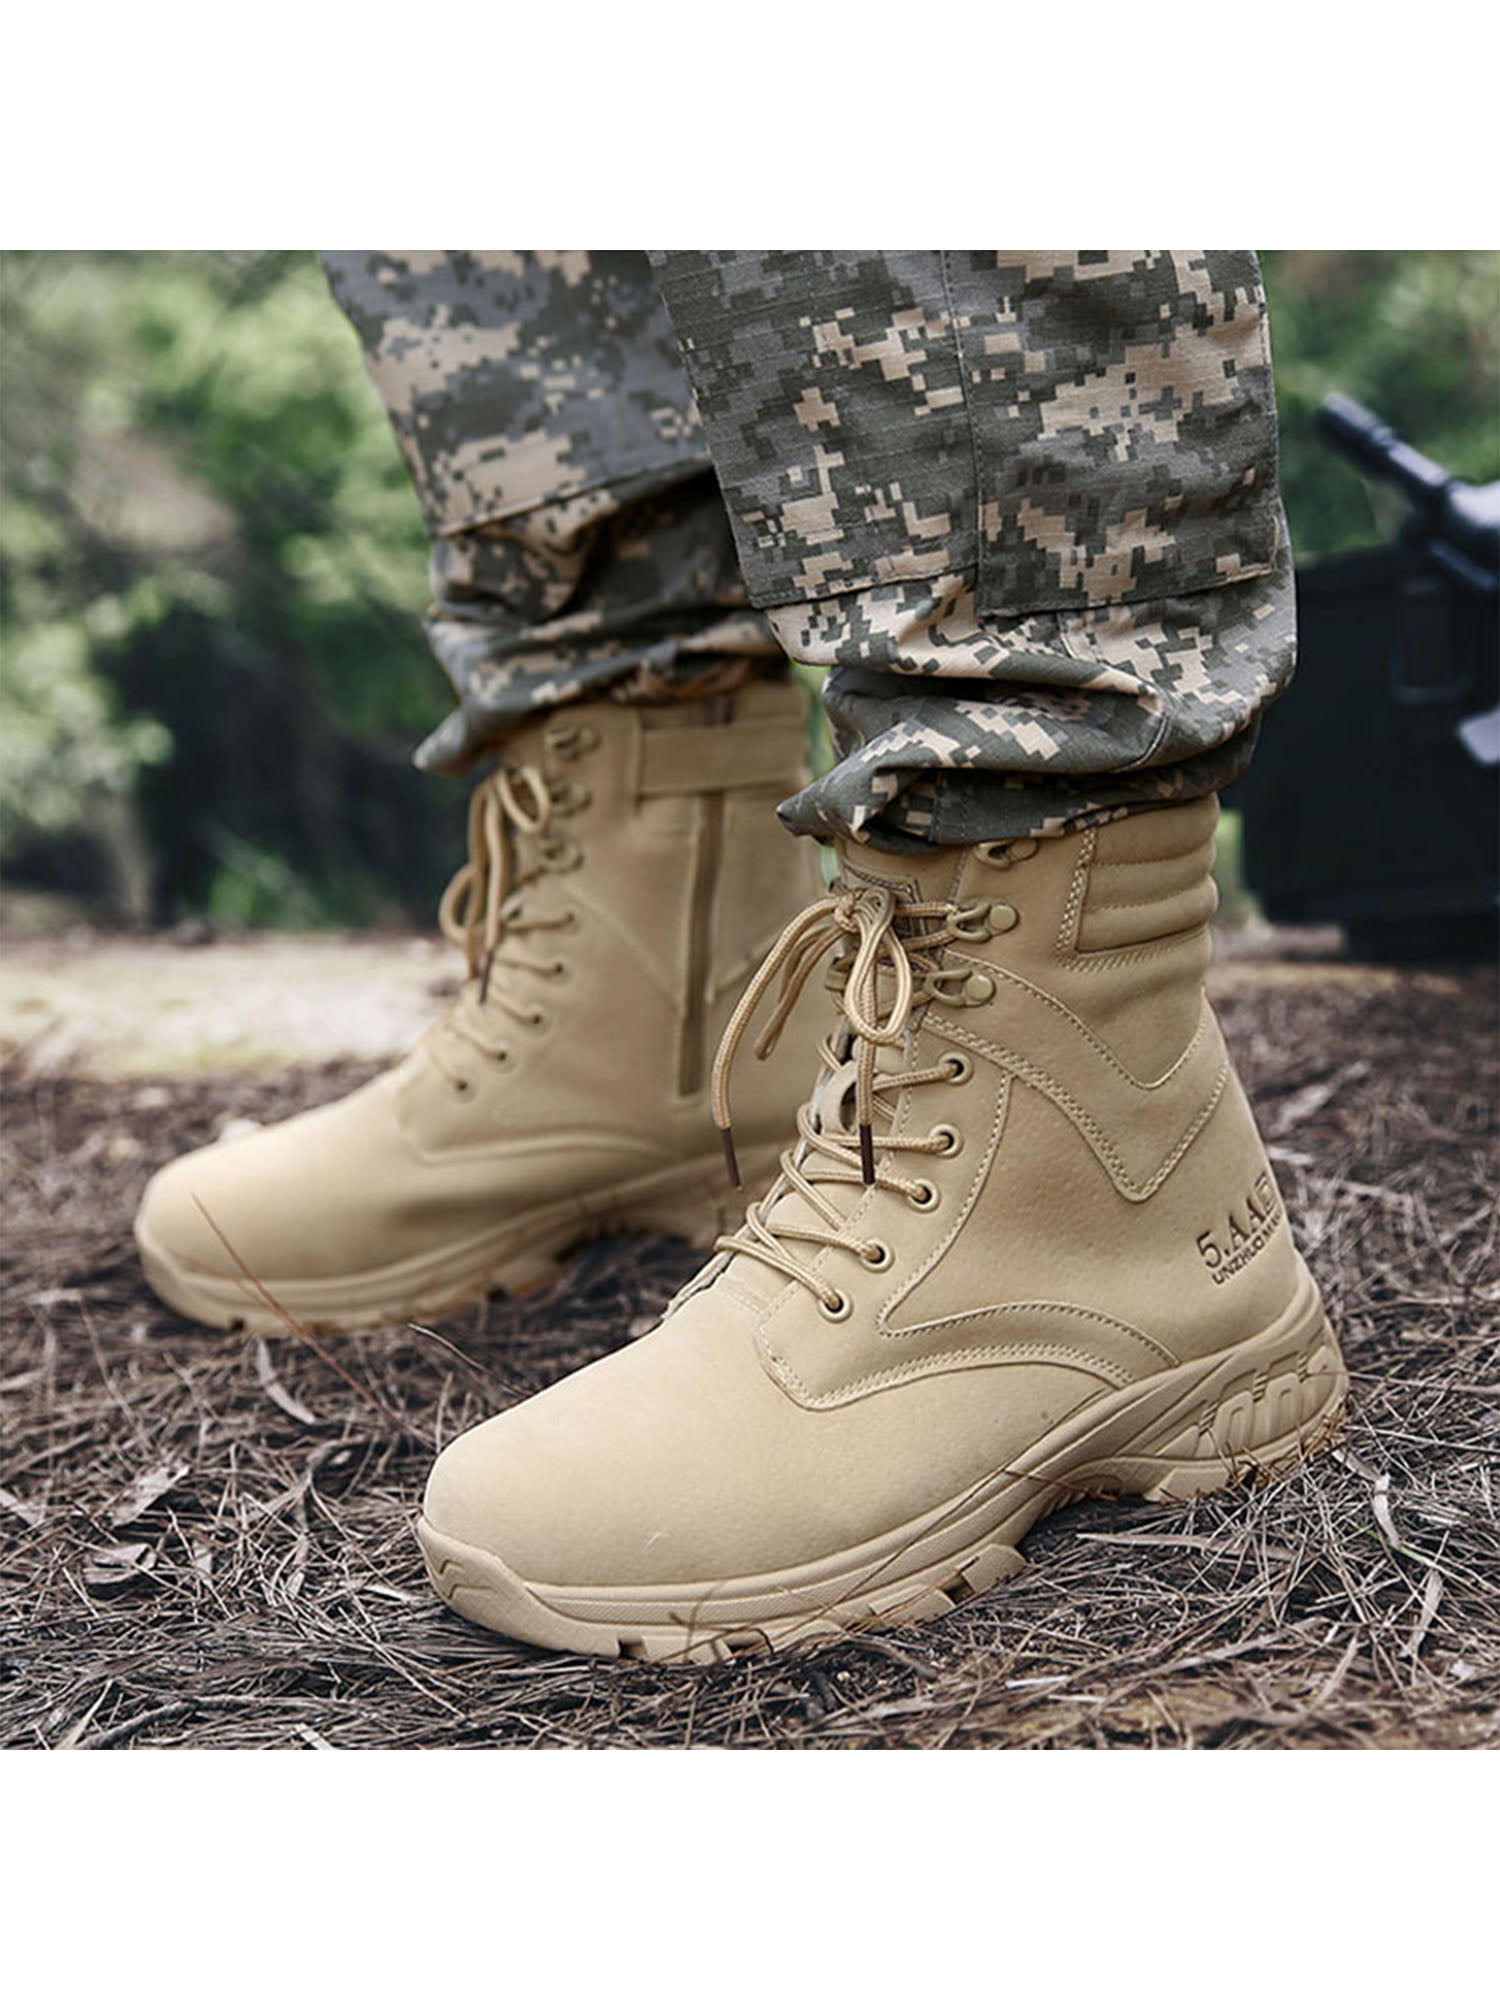 Men’s Tactical Boots Lightweight Combat Boots Durable Suede Leather and Rubber Sole Military Work and Desert Boots 